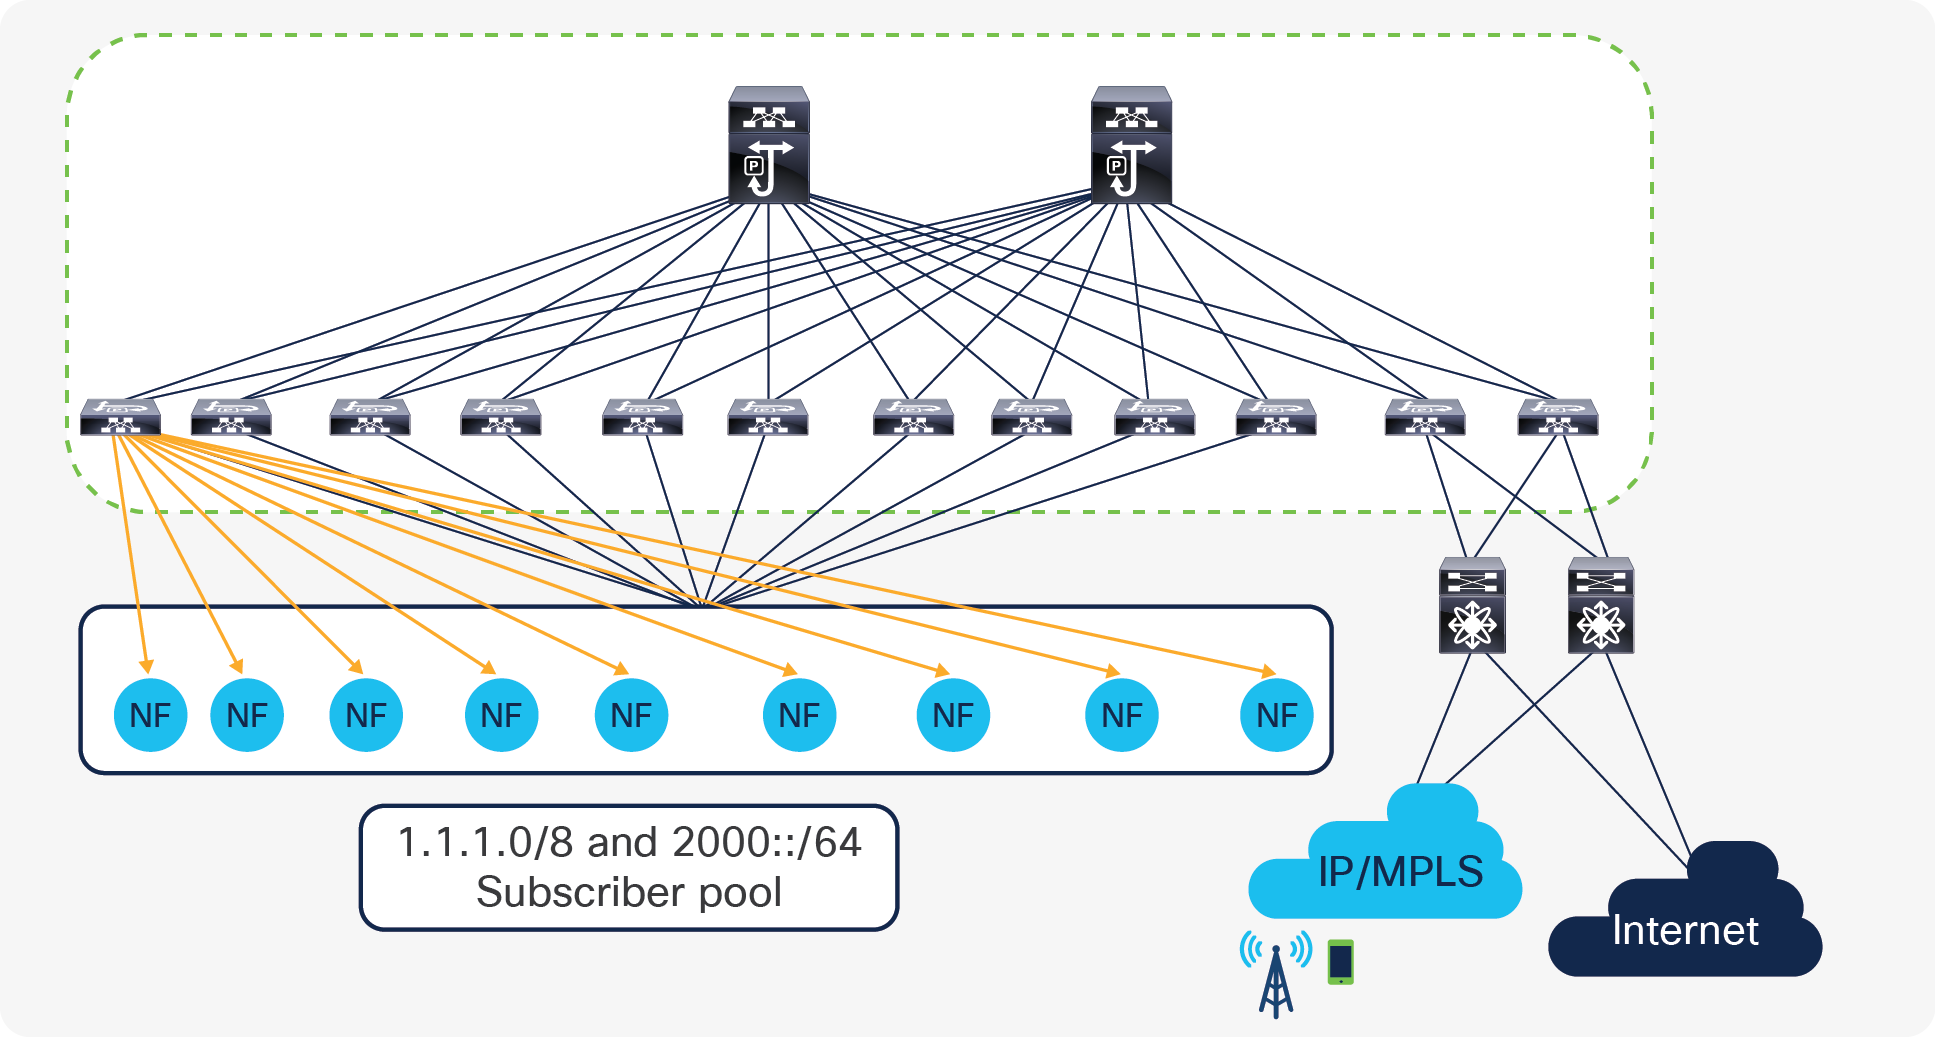 Packet core traffic forwarding requirements